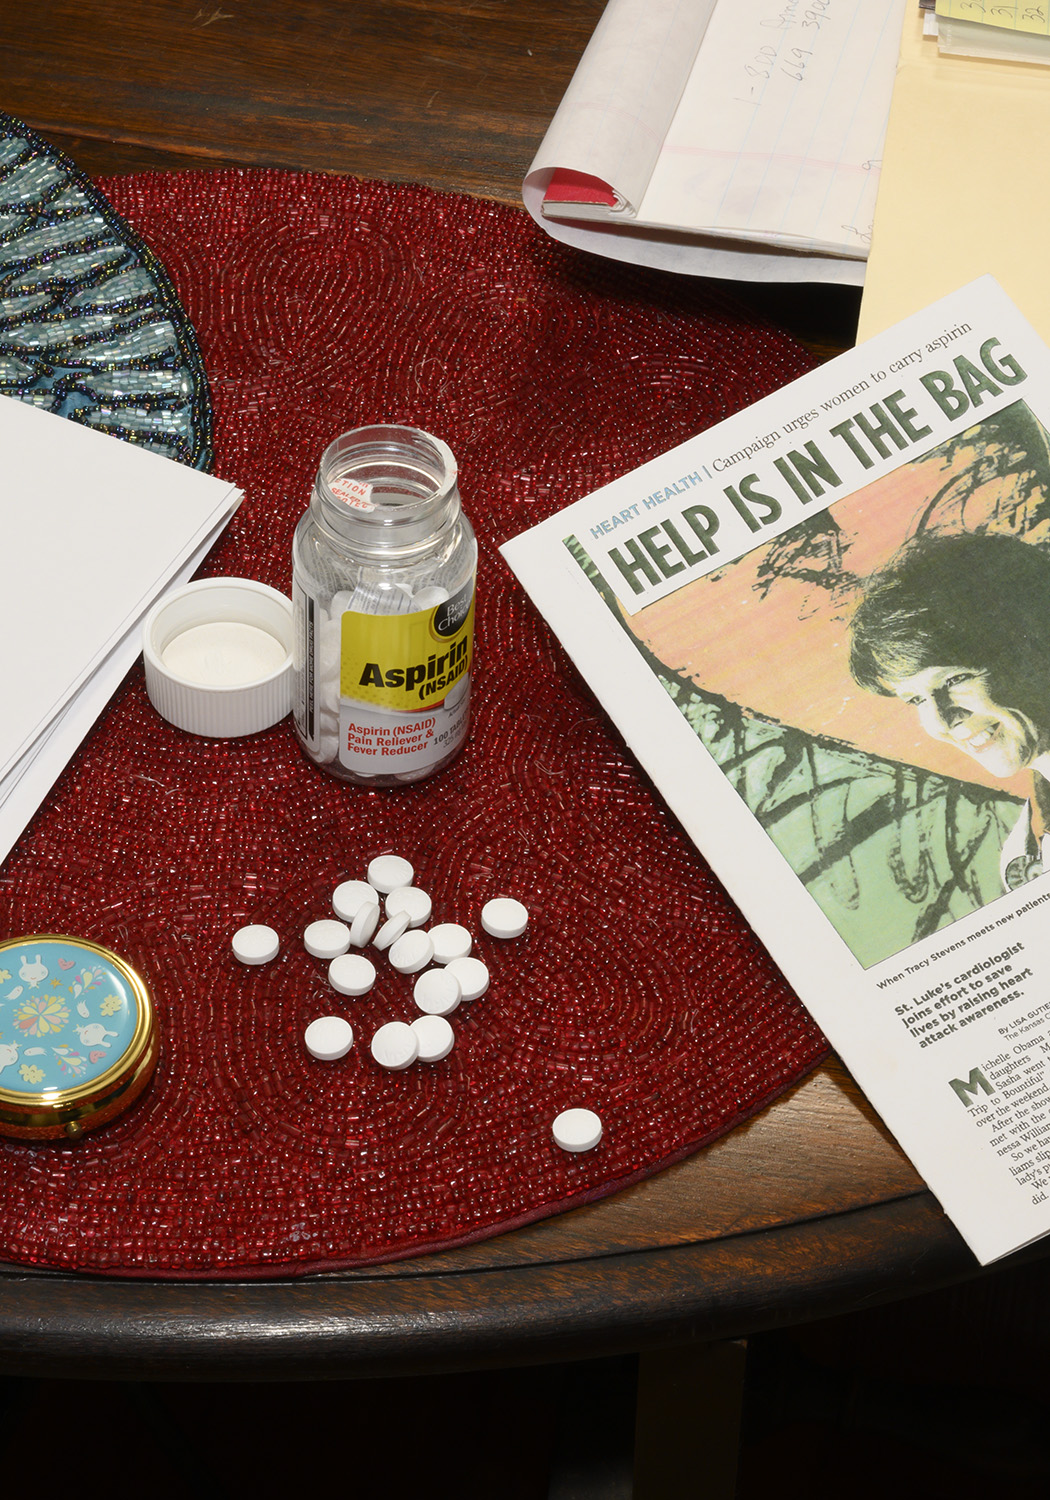 Aspirin and Dr. Stevens article that Dixie made into a card that reads, 'Help is in the Bag.'